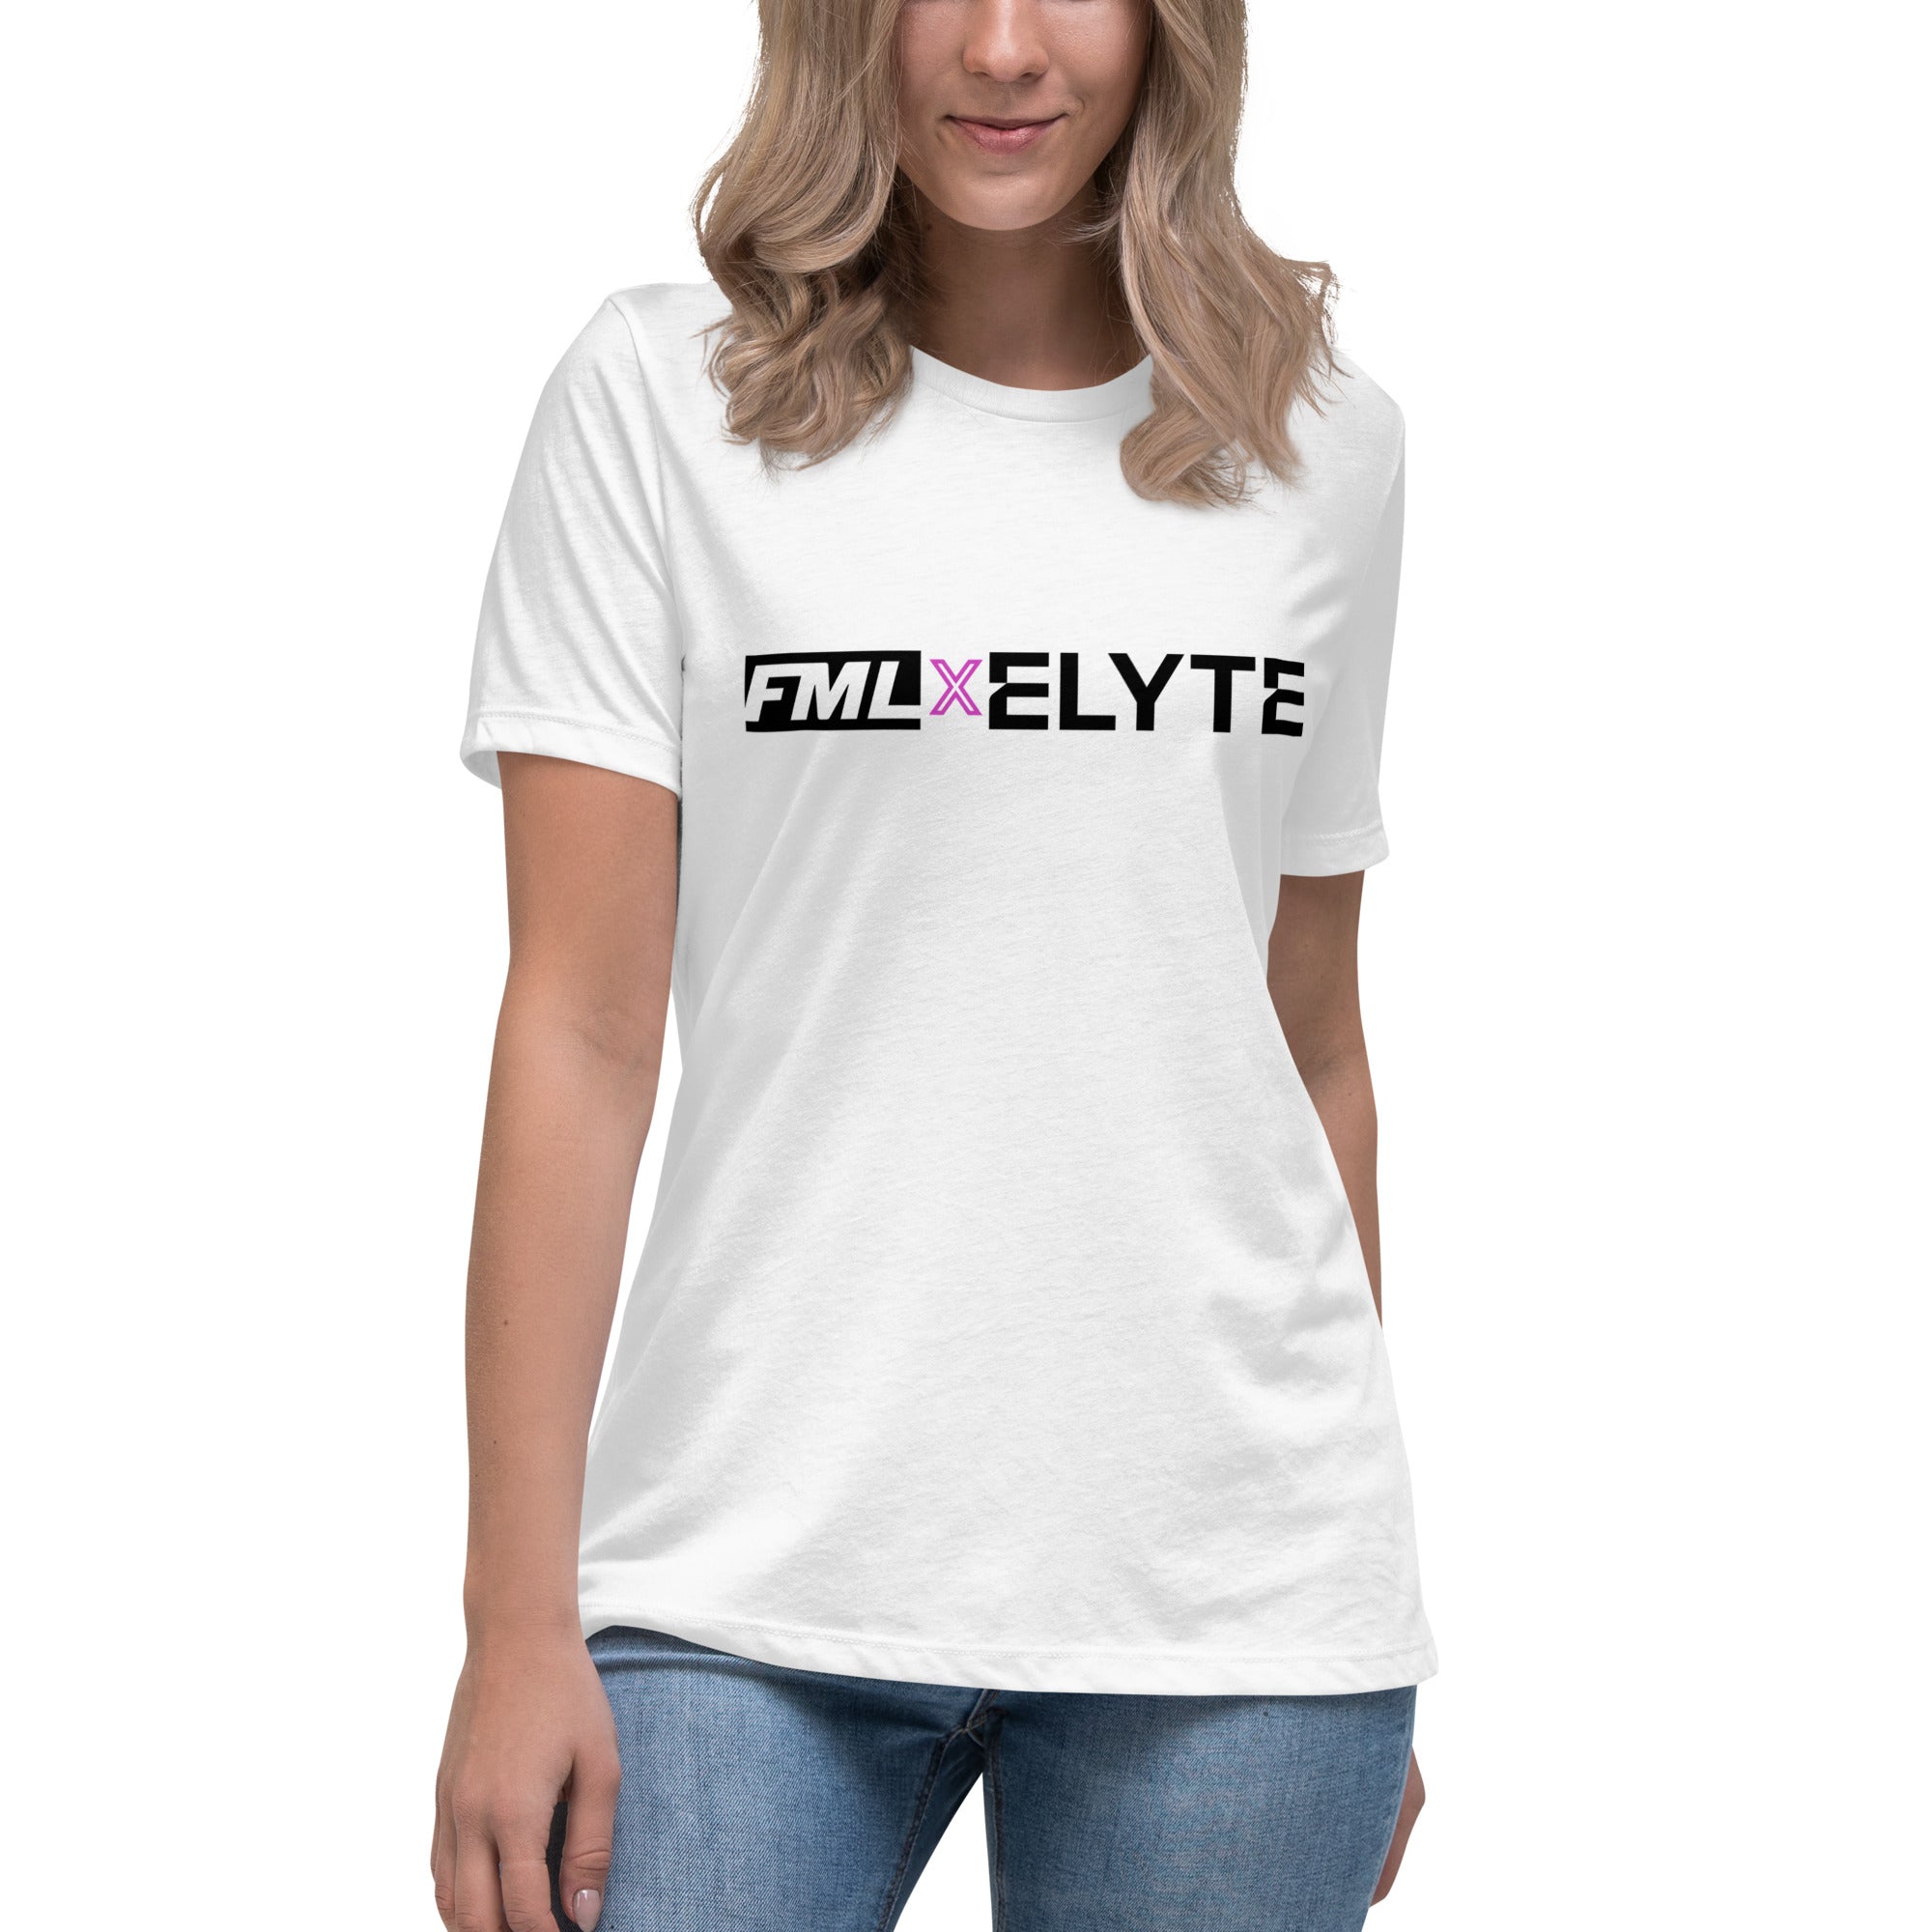 FML X ELYTE WOMEN'S White Relaxed TEE with Pink Accent